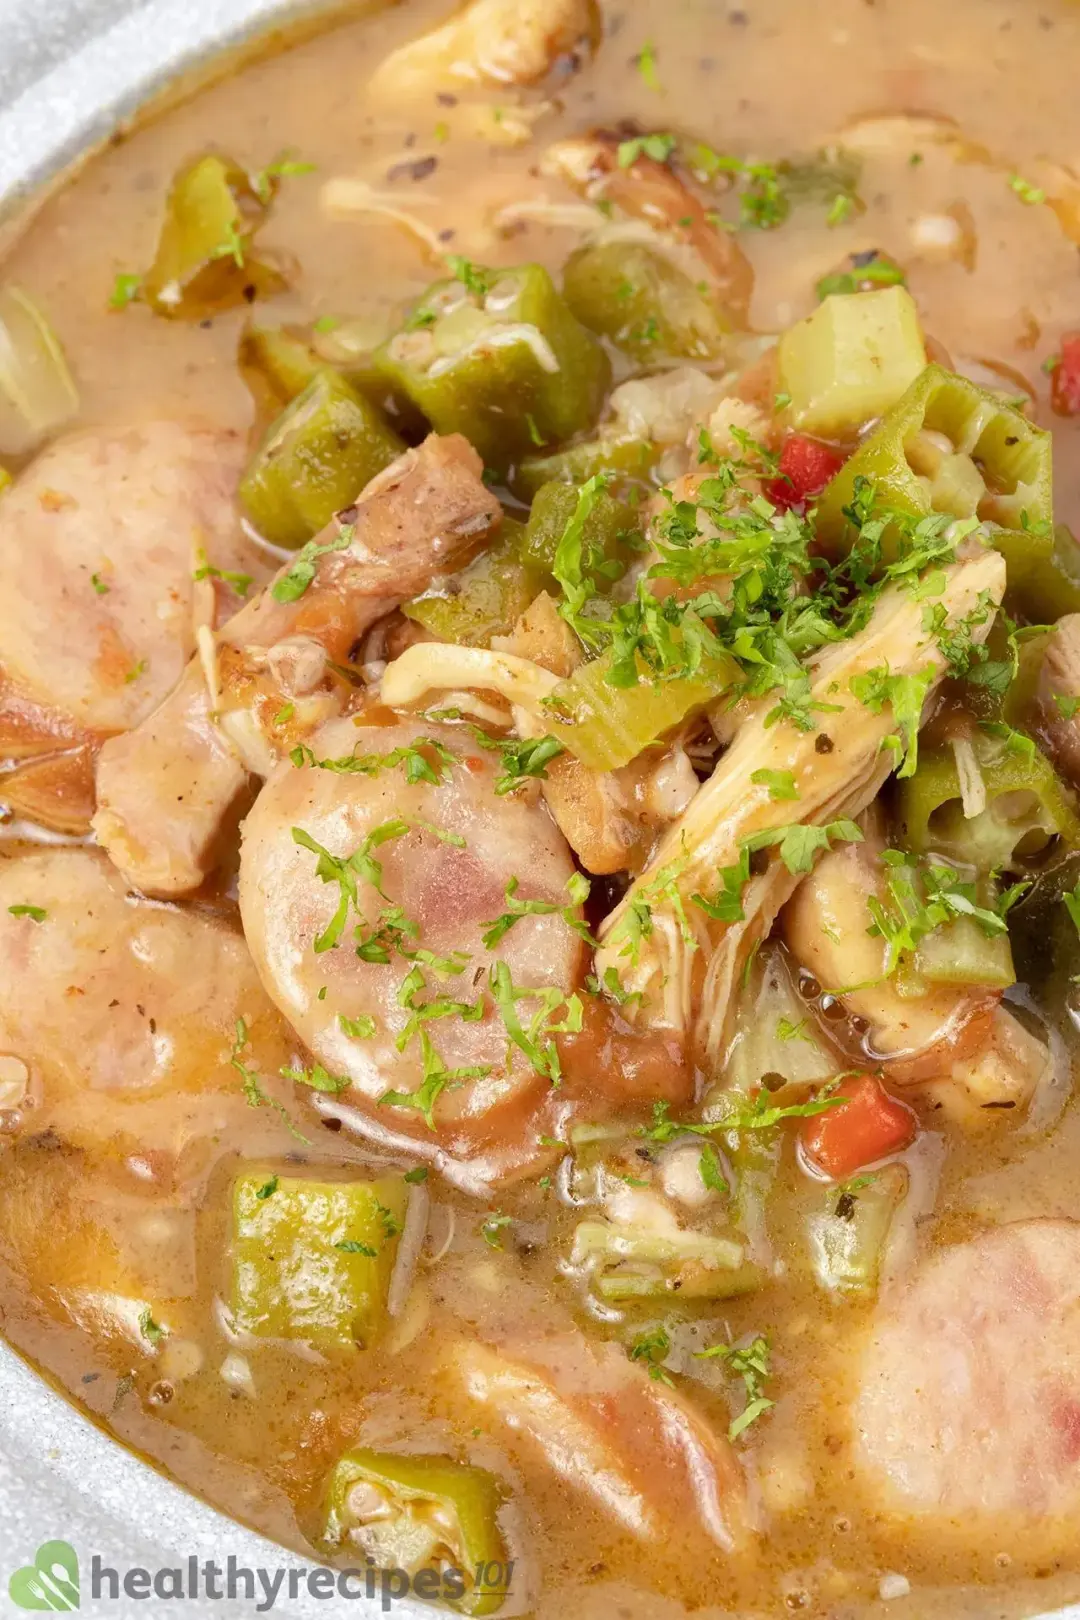 Chicken and Sausage Gumbo Recipe